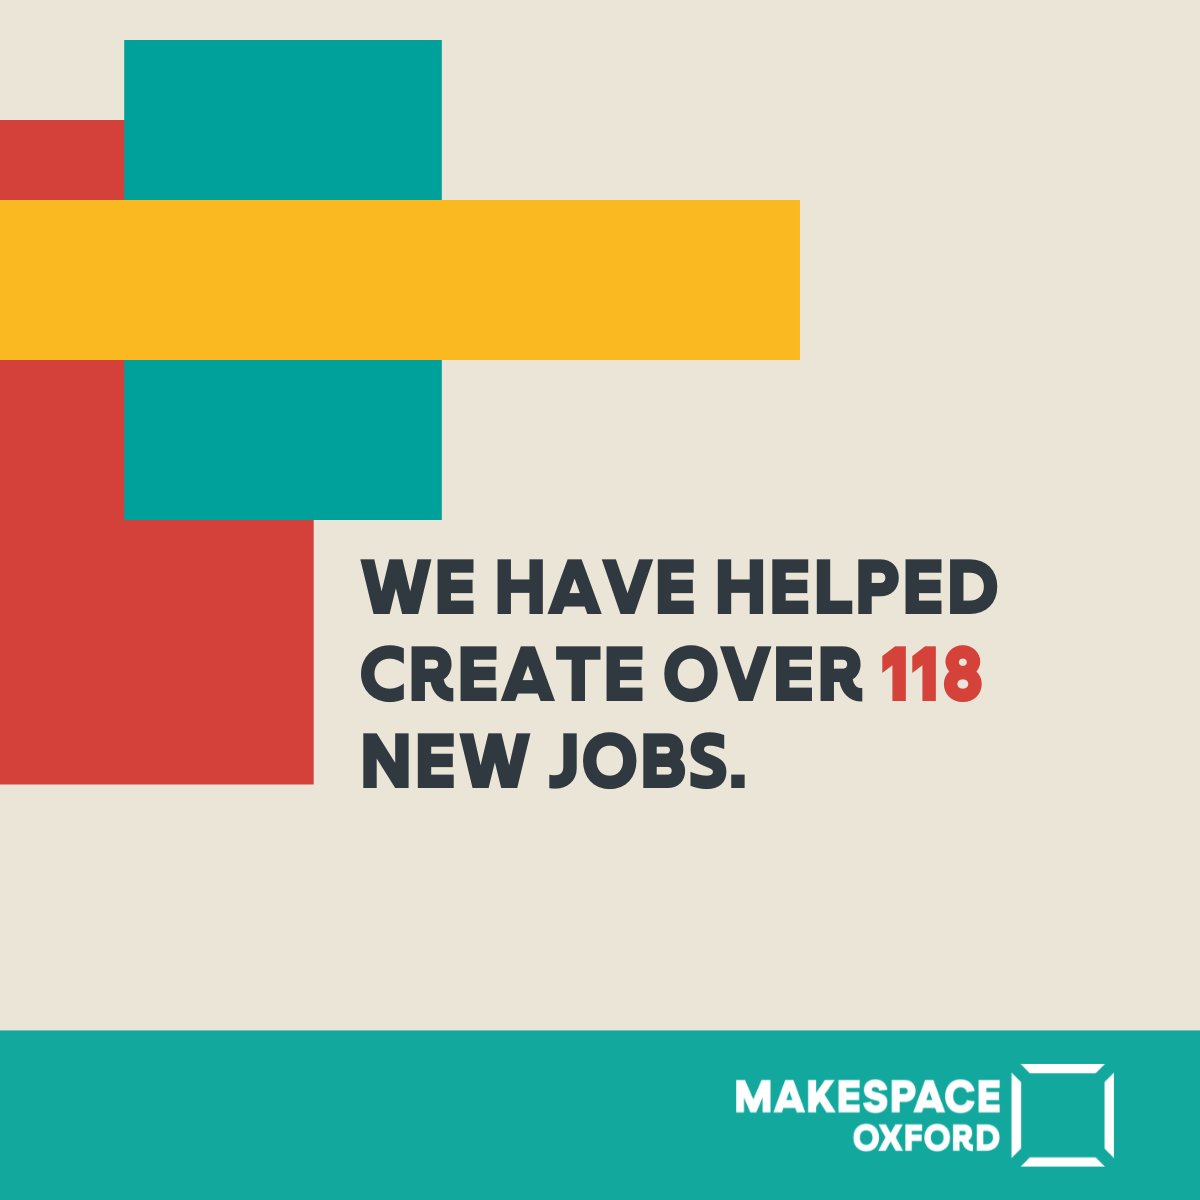 Through supporting the different organisations in our spaces we have managed to create or support over 118 Jobs. At Makespace we are proud to support collective action & impact projects that are moving in a positive community direction.

#MakespaceOxford #Oxford #meanwhilespace